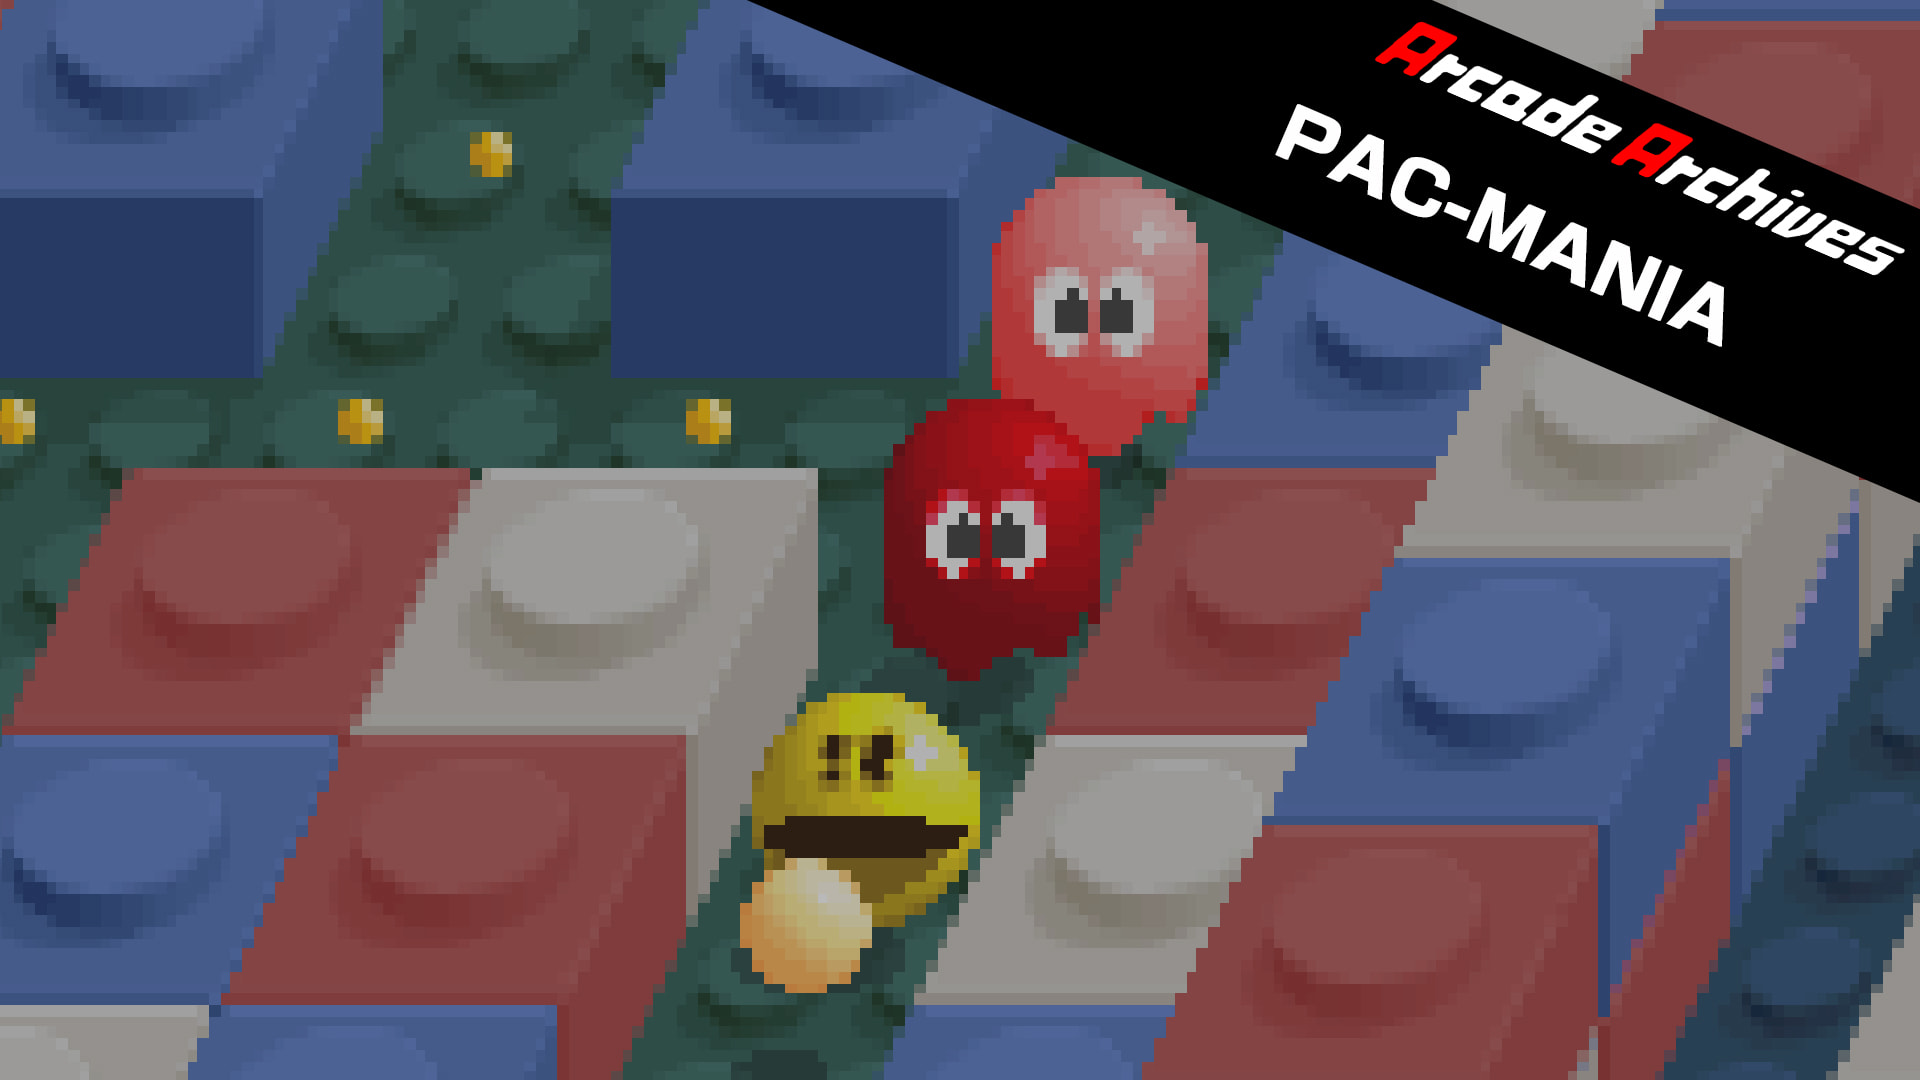 Arcade Archives PAC-MANIA